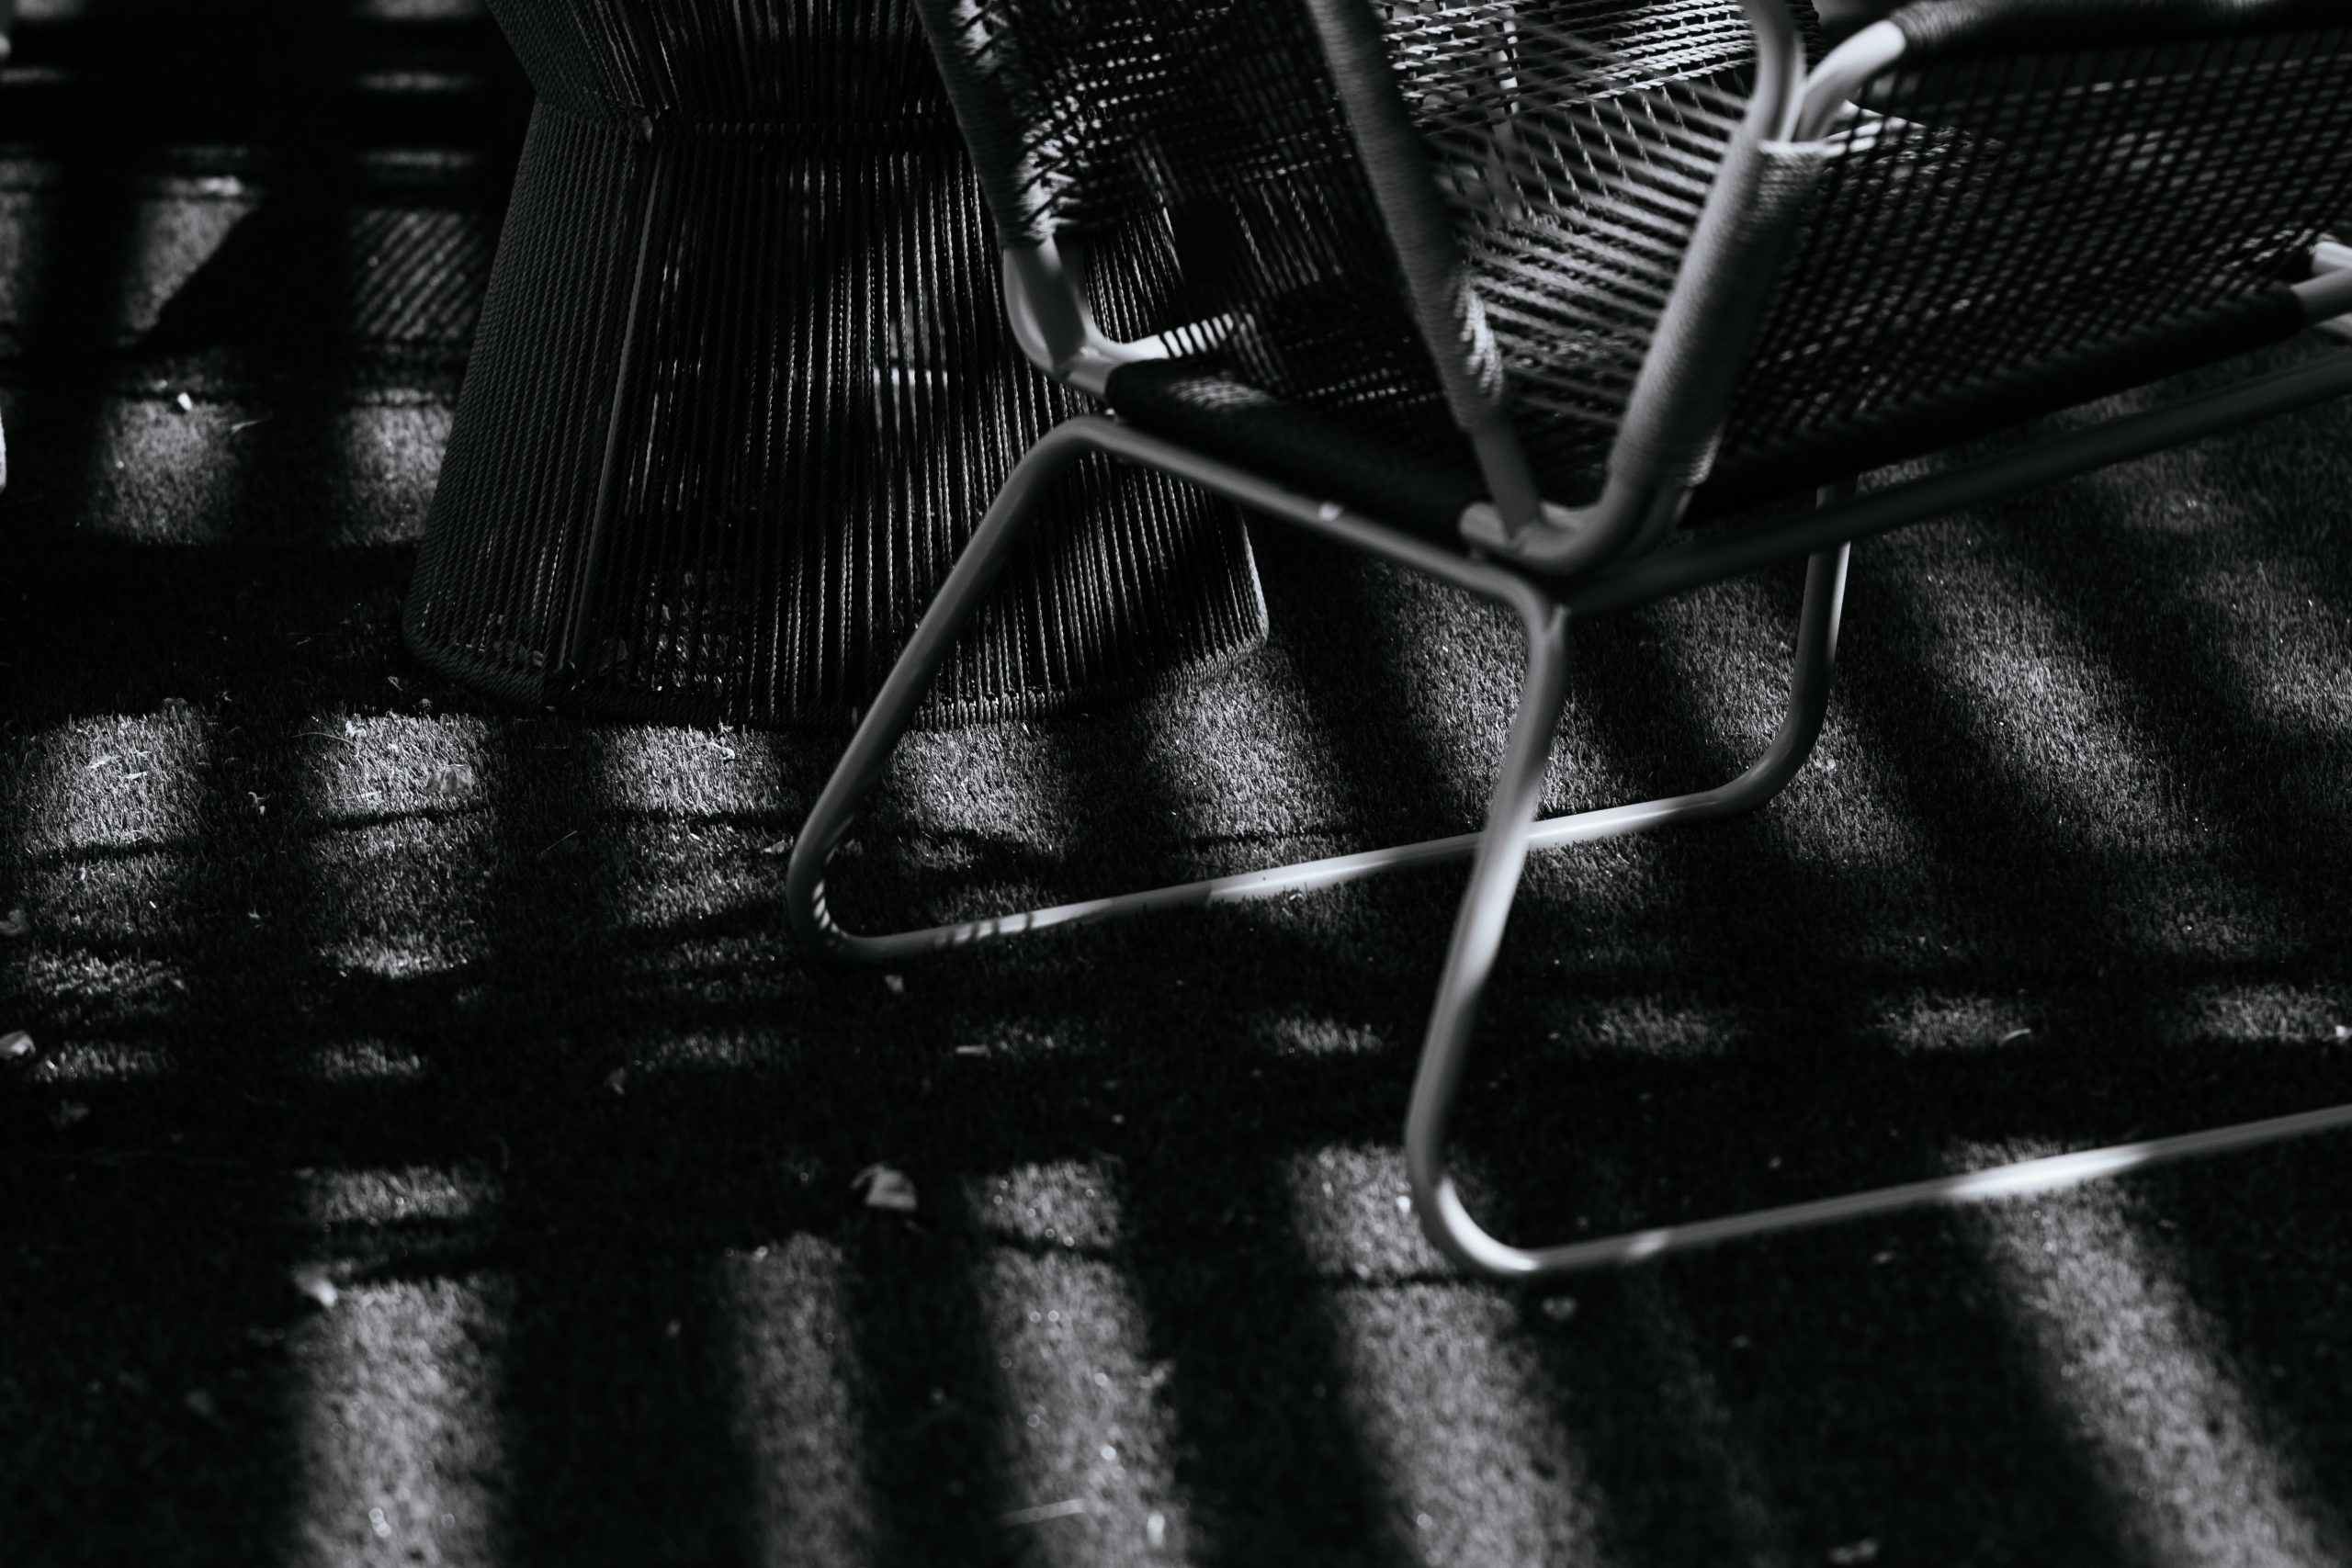 Black and white photo of high contrast light and shadow of patio furniture and astro turf.